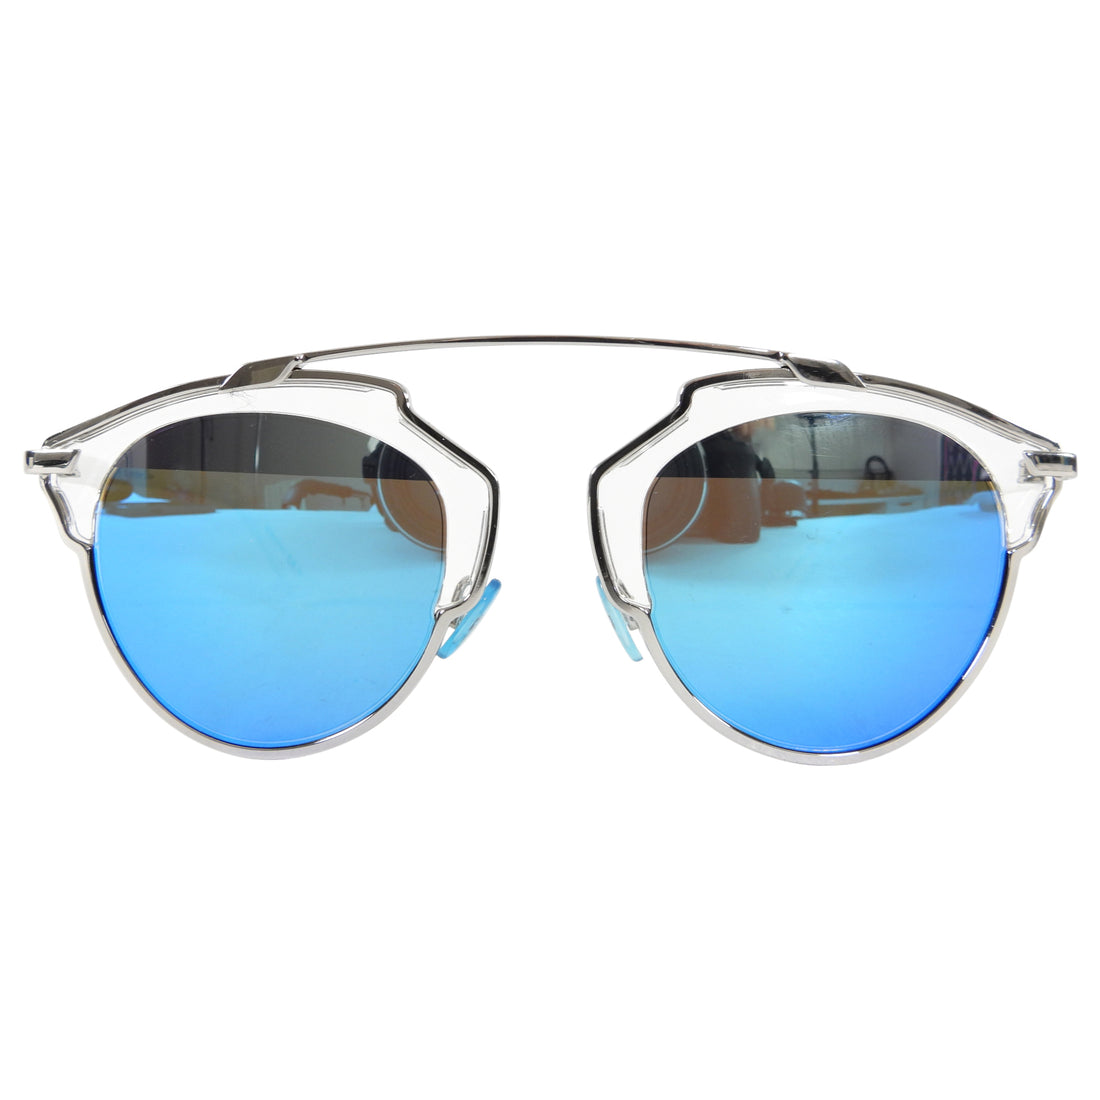 Dior So Real Blue Mirror Lens and Silver Metal Sunglasses 